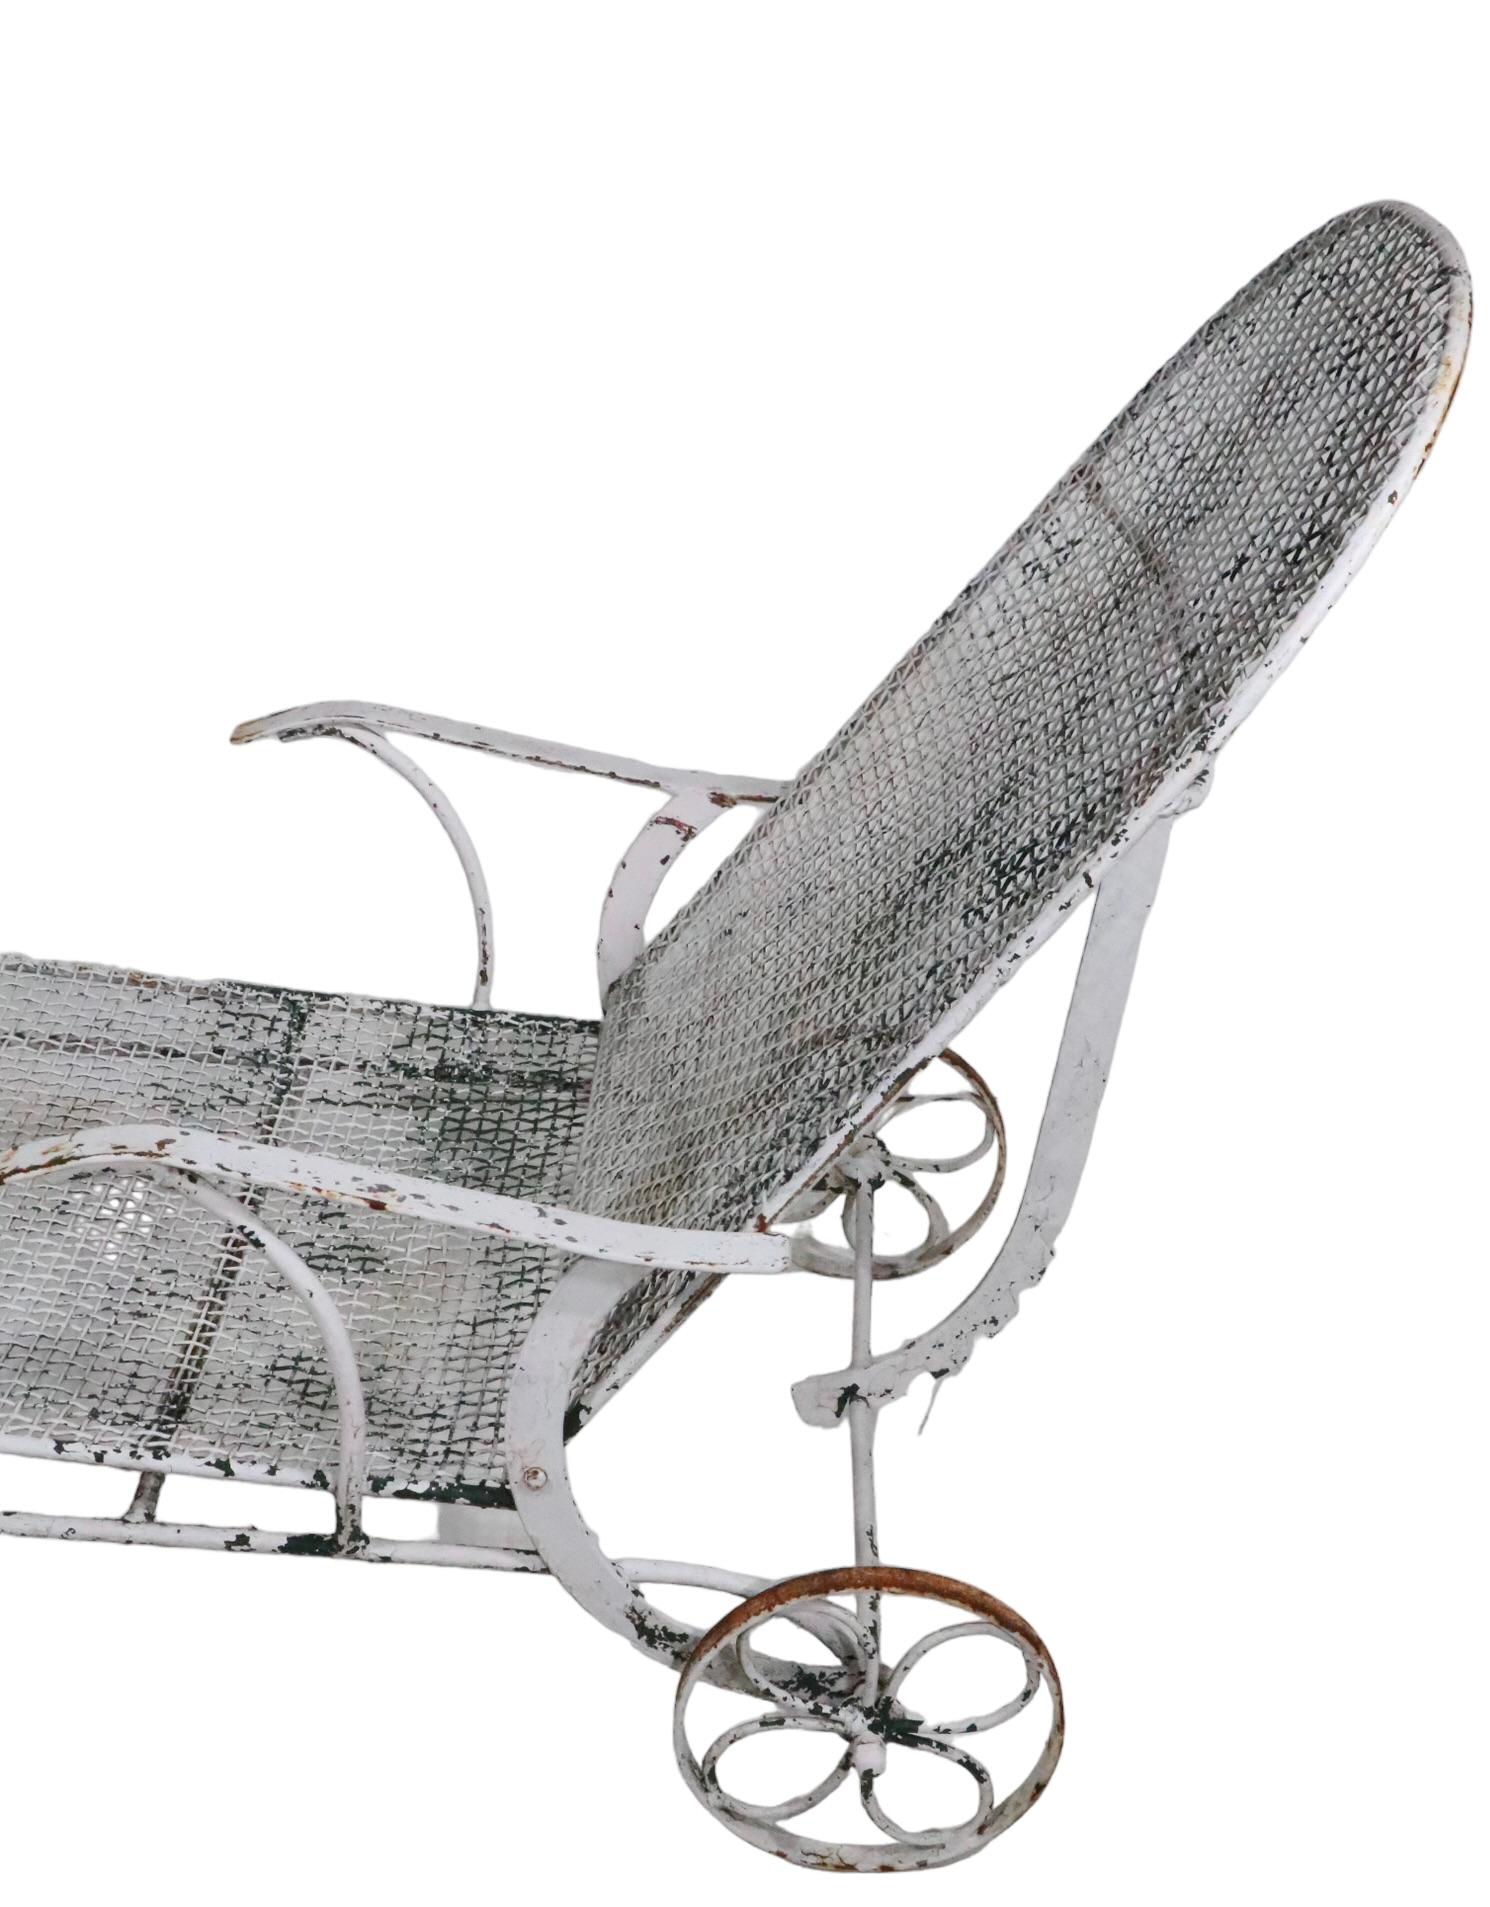  Wrought Iron Garden Poolside Patio Woodard Sculptura Chaise Lounge c. 1950's For Sale 6